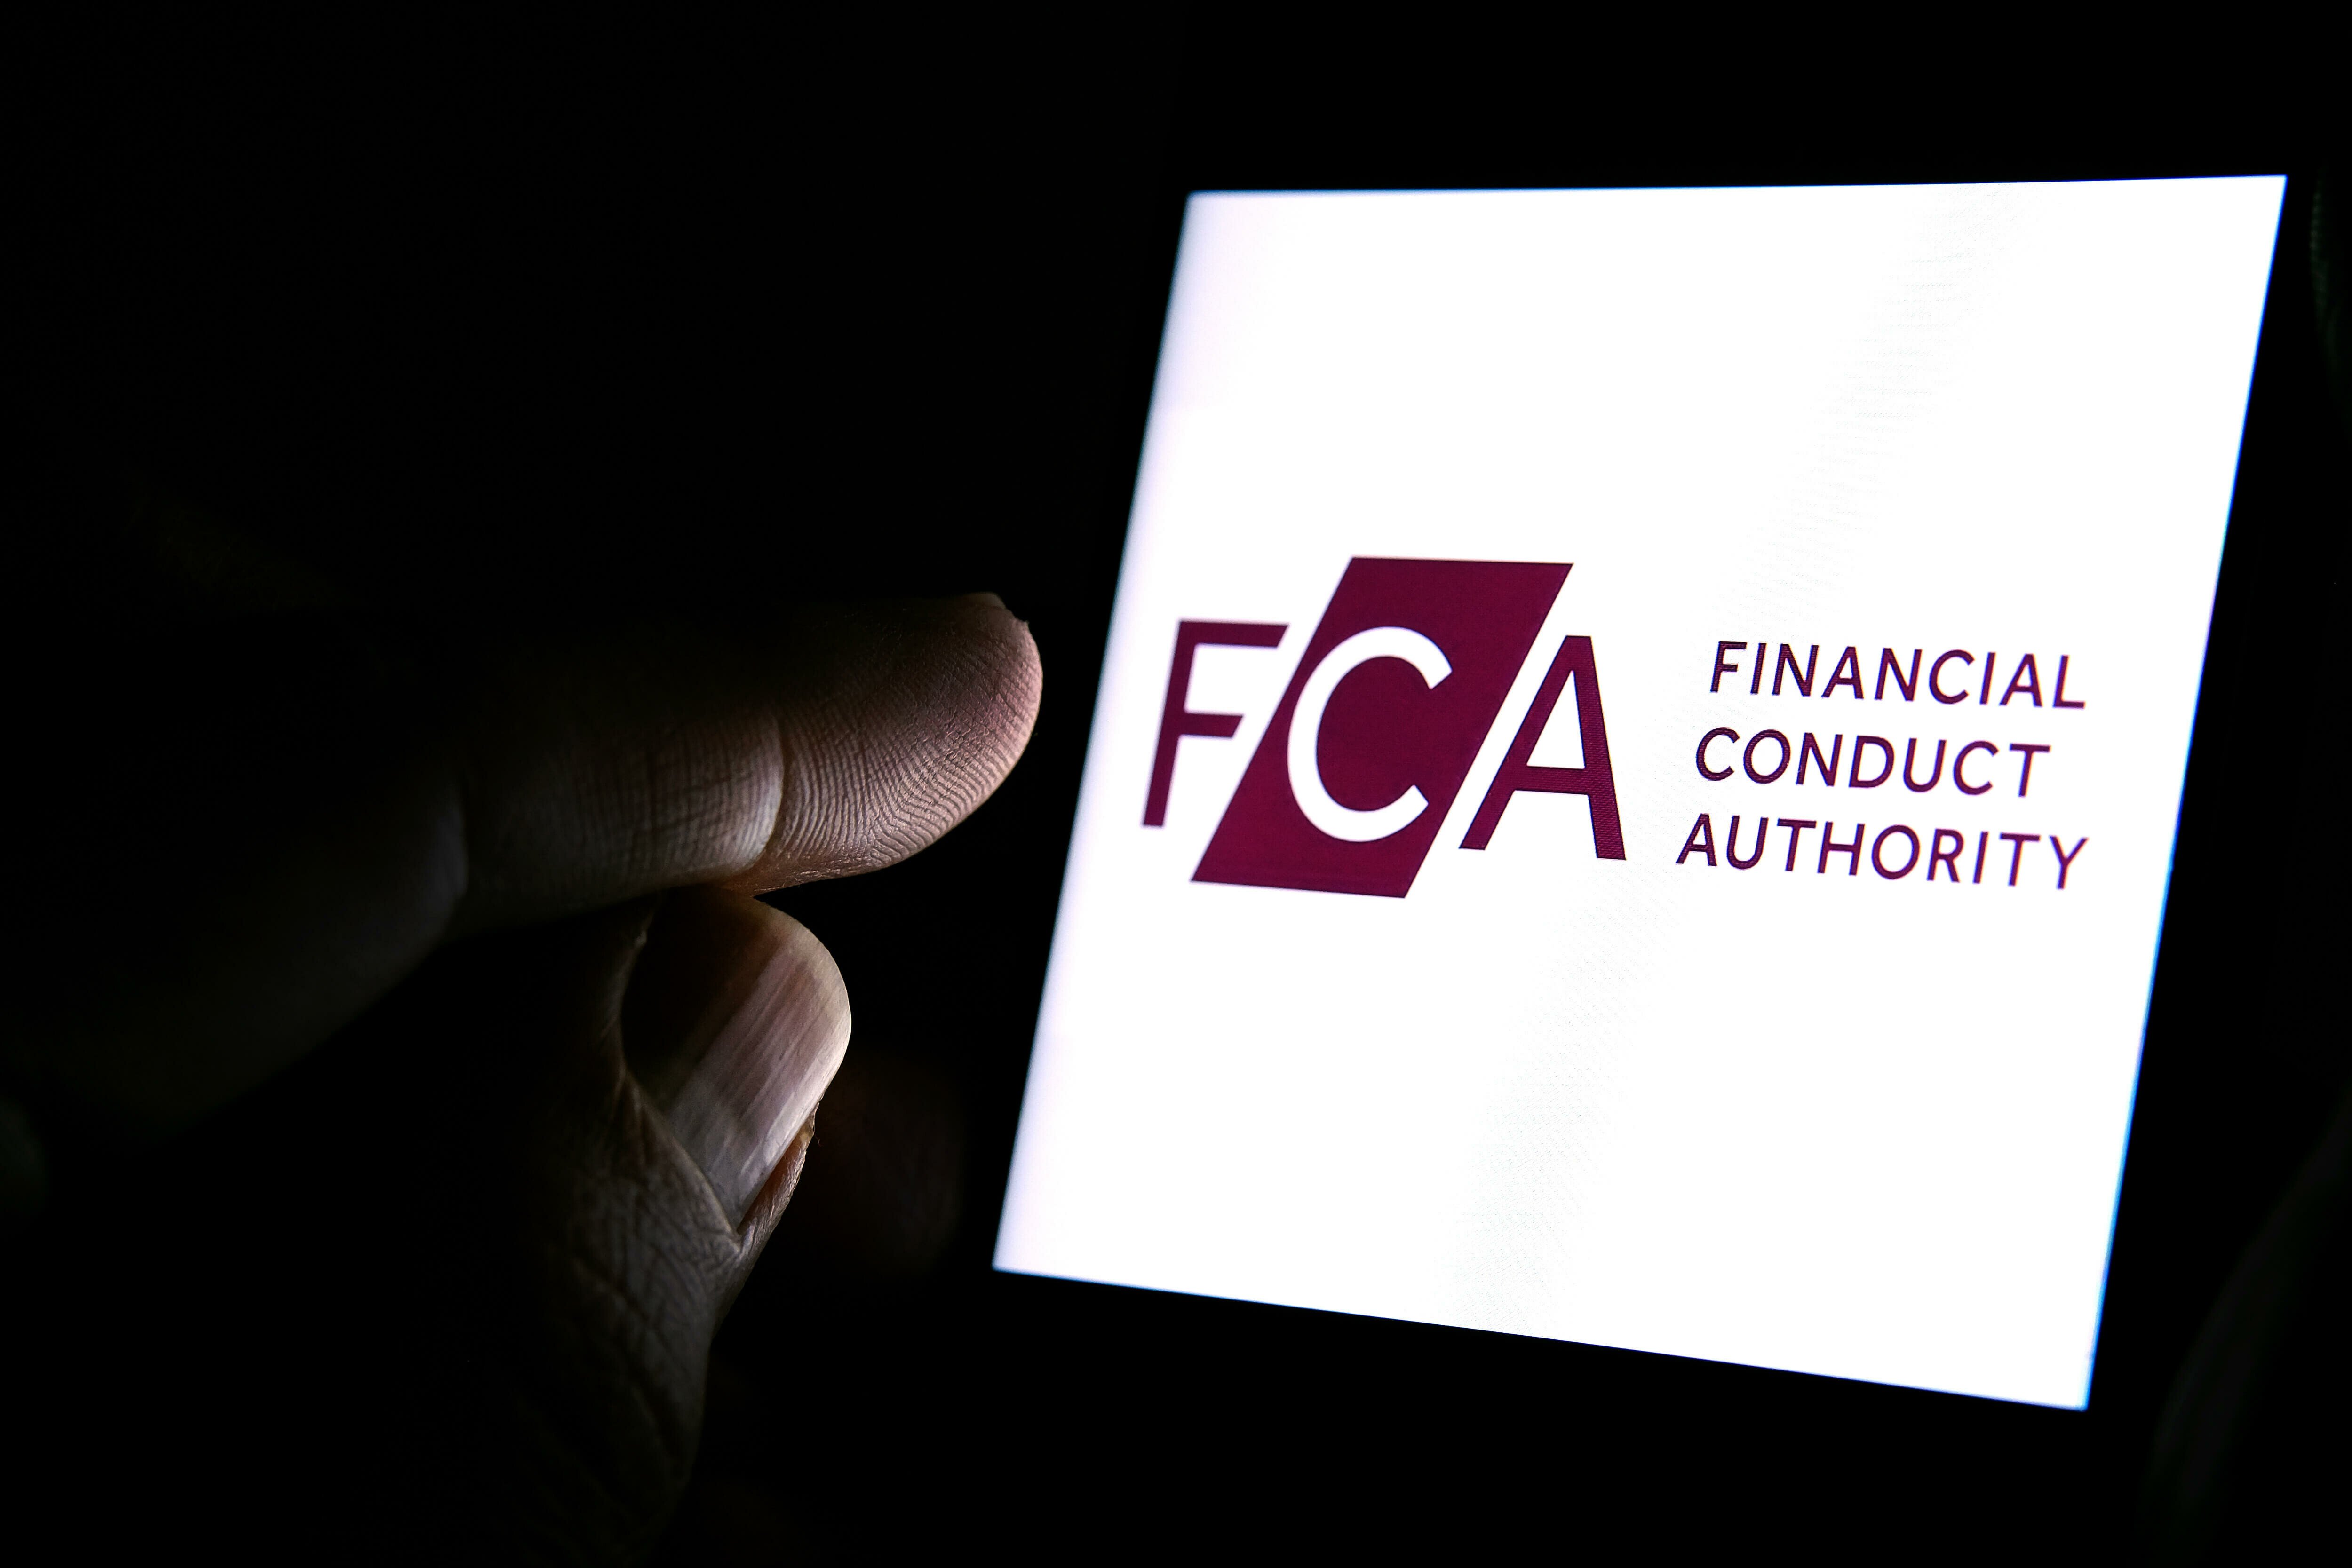 fca financial conduct authority